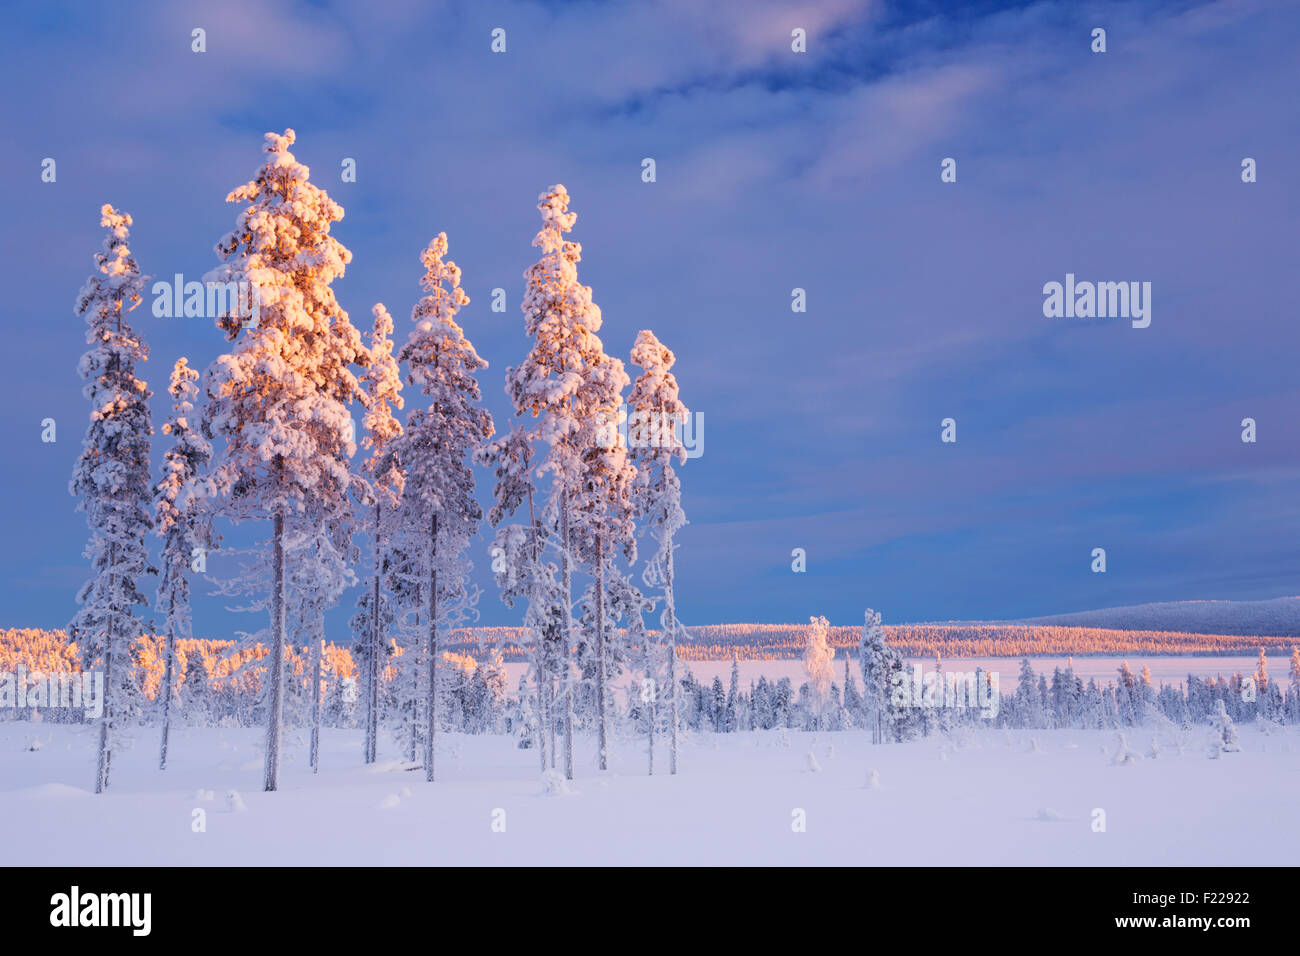 Wintry landscape in Finnish Lapland, photographed at sunset. Stock Photo